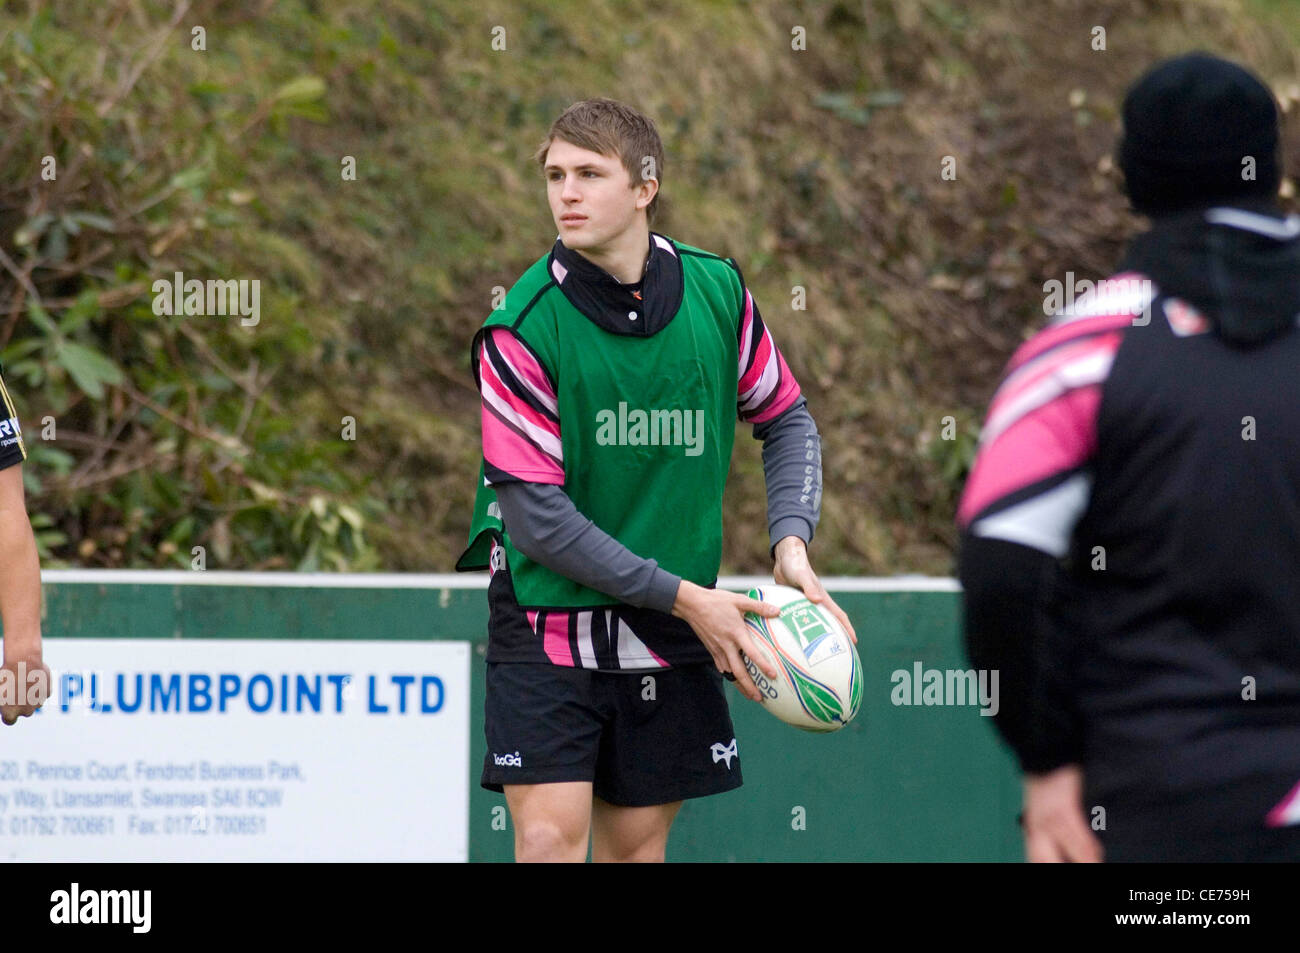 Ospreys 17-year-old rugby player Tom Prydie. Stock Photo